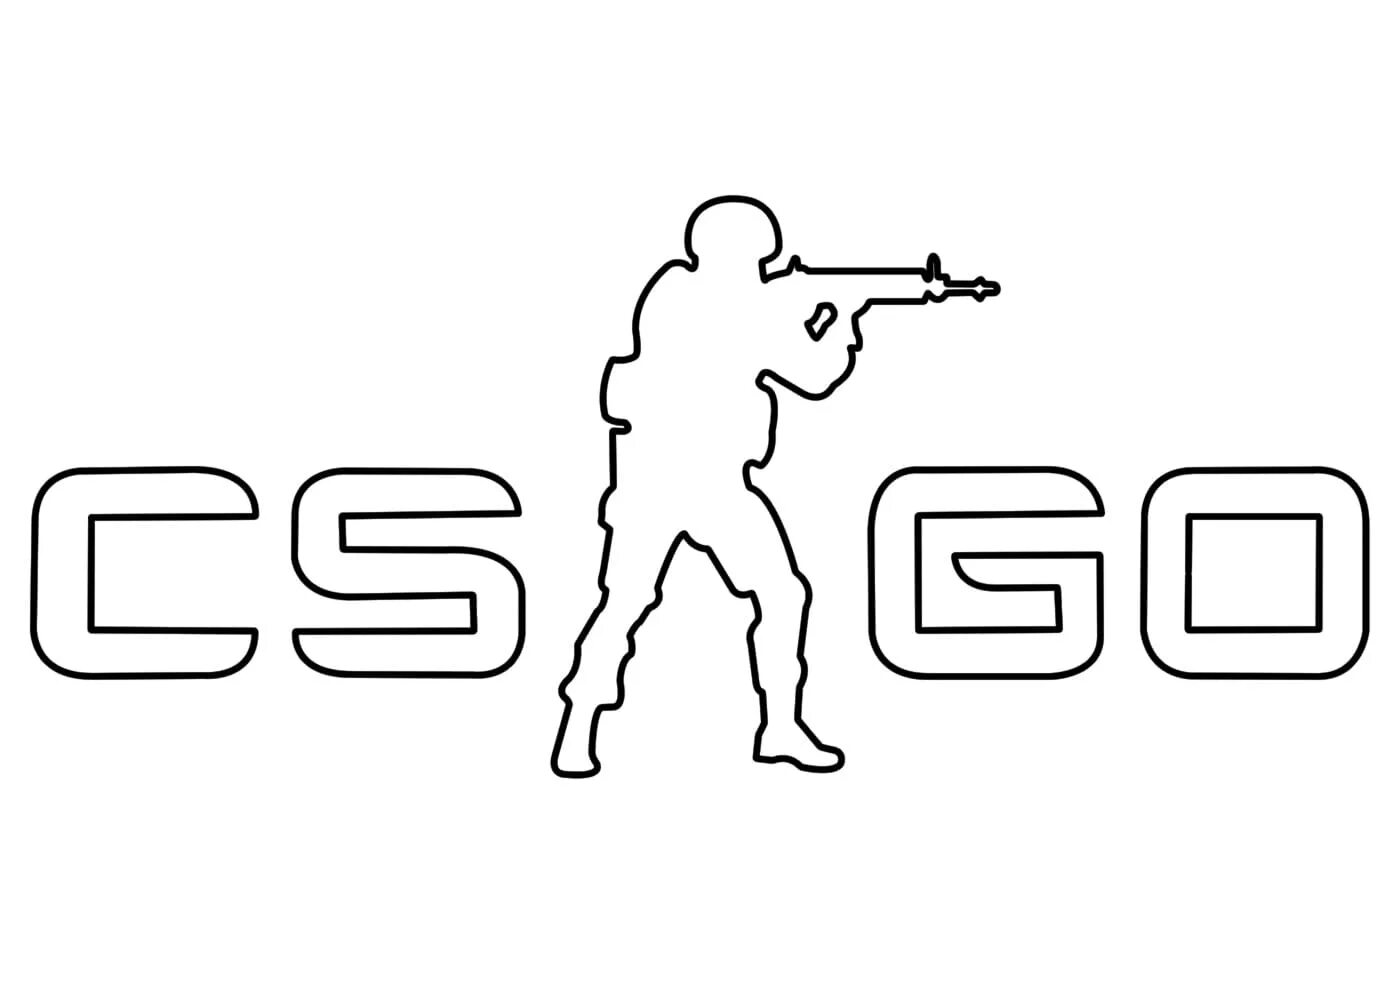 Awesome standoff 2 logo coloring page